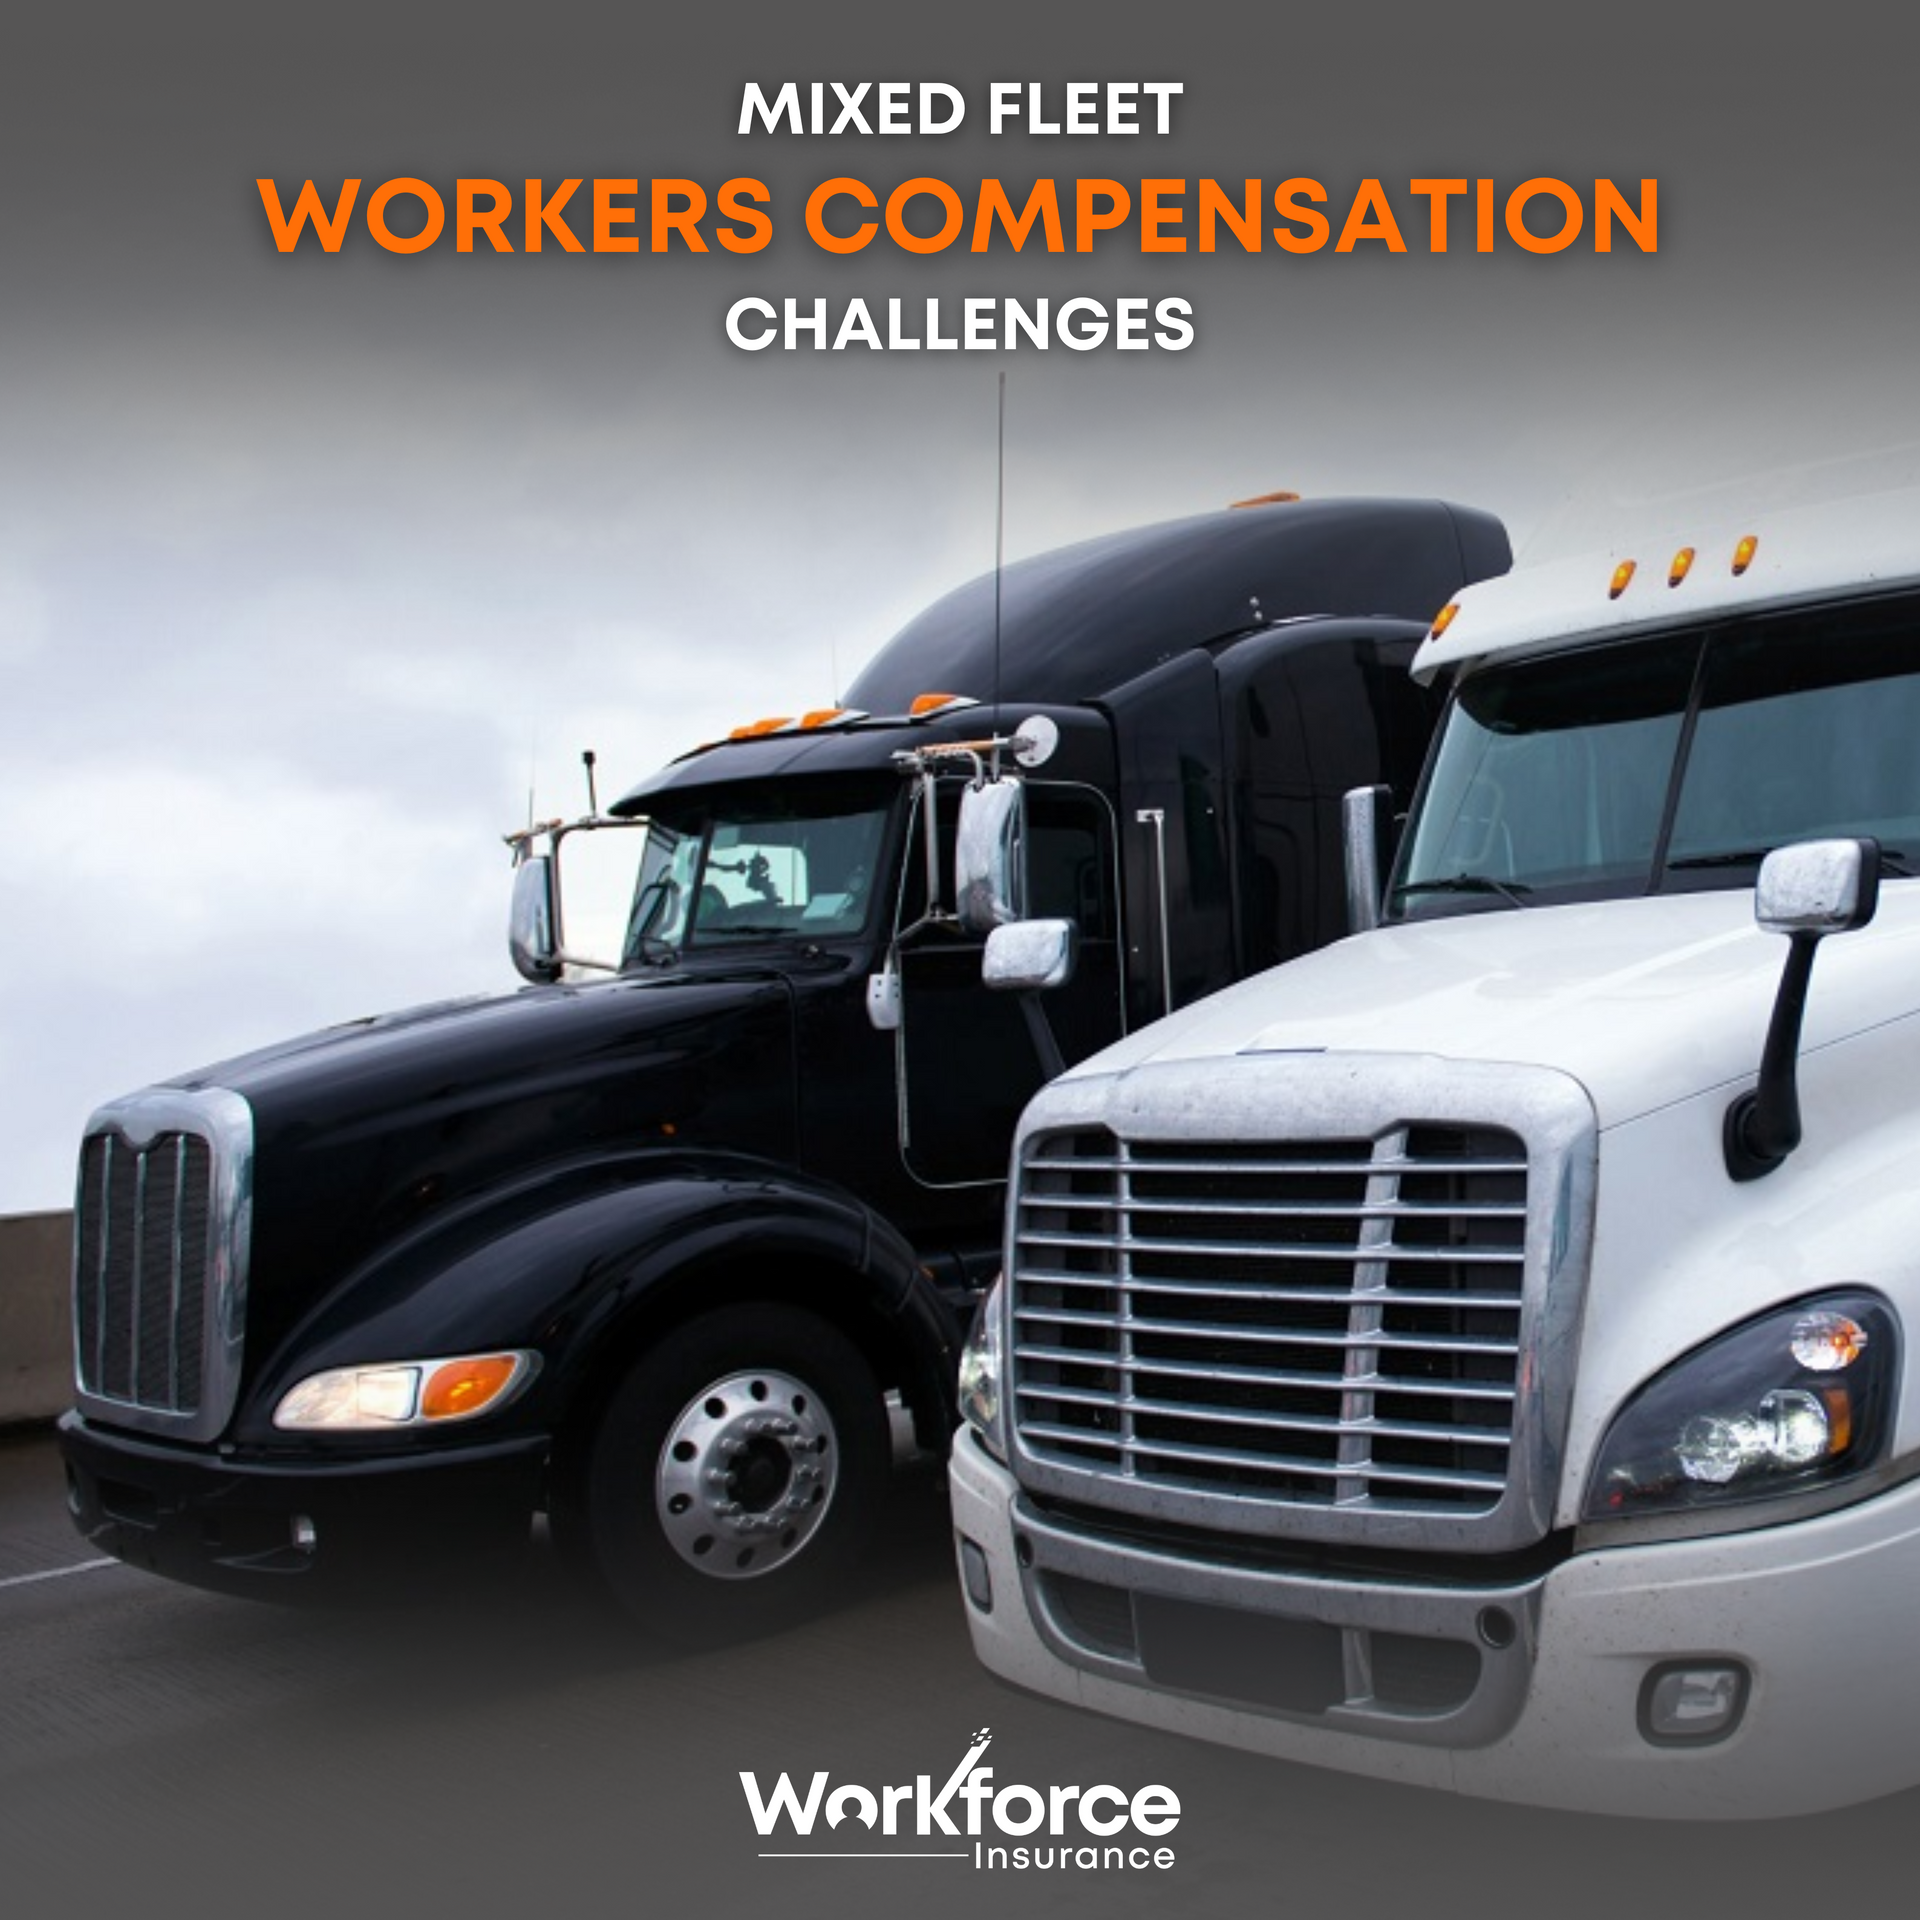 Two trucks driving on the highway represent the challenge of obtaining Workers Compensation coverage